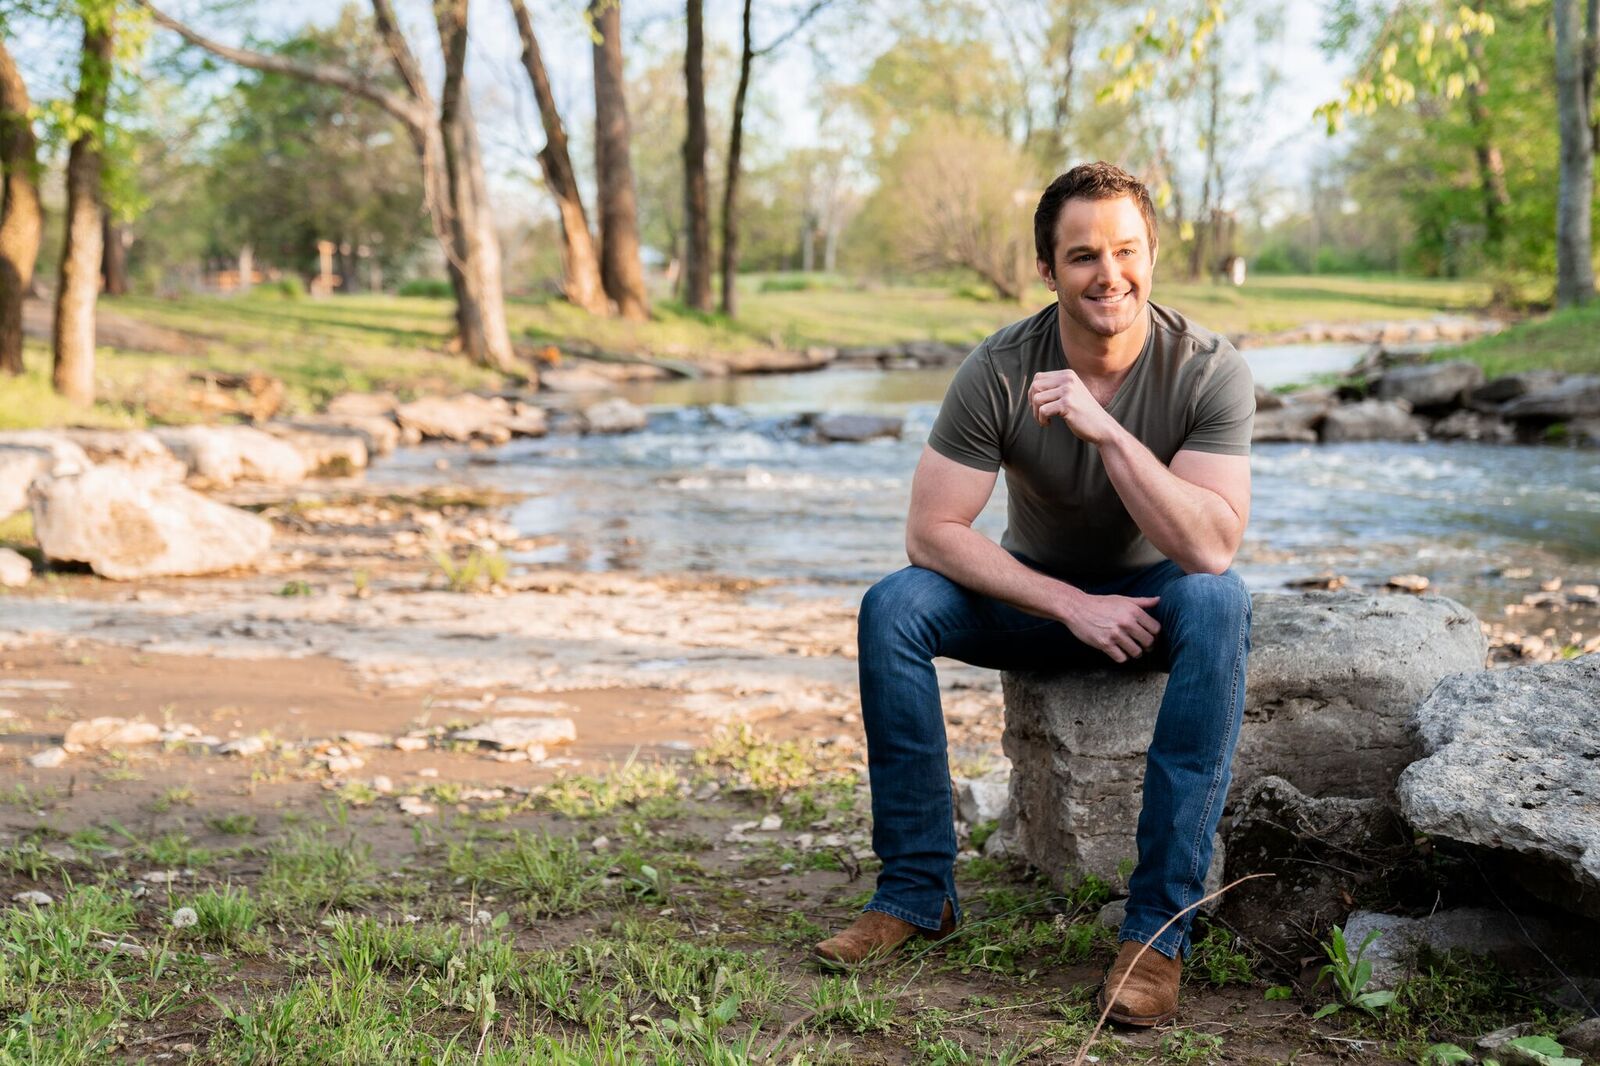 Easton Corbin Has An Infectious Groove With “Turn Up”